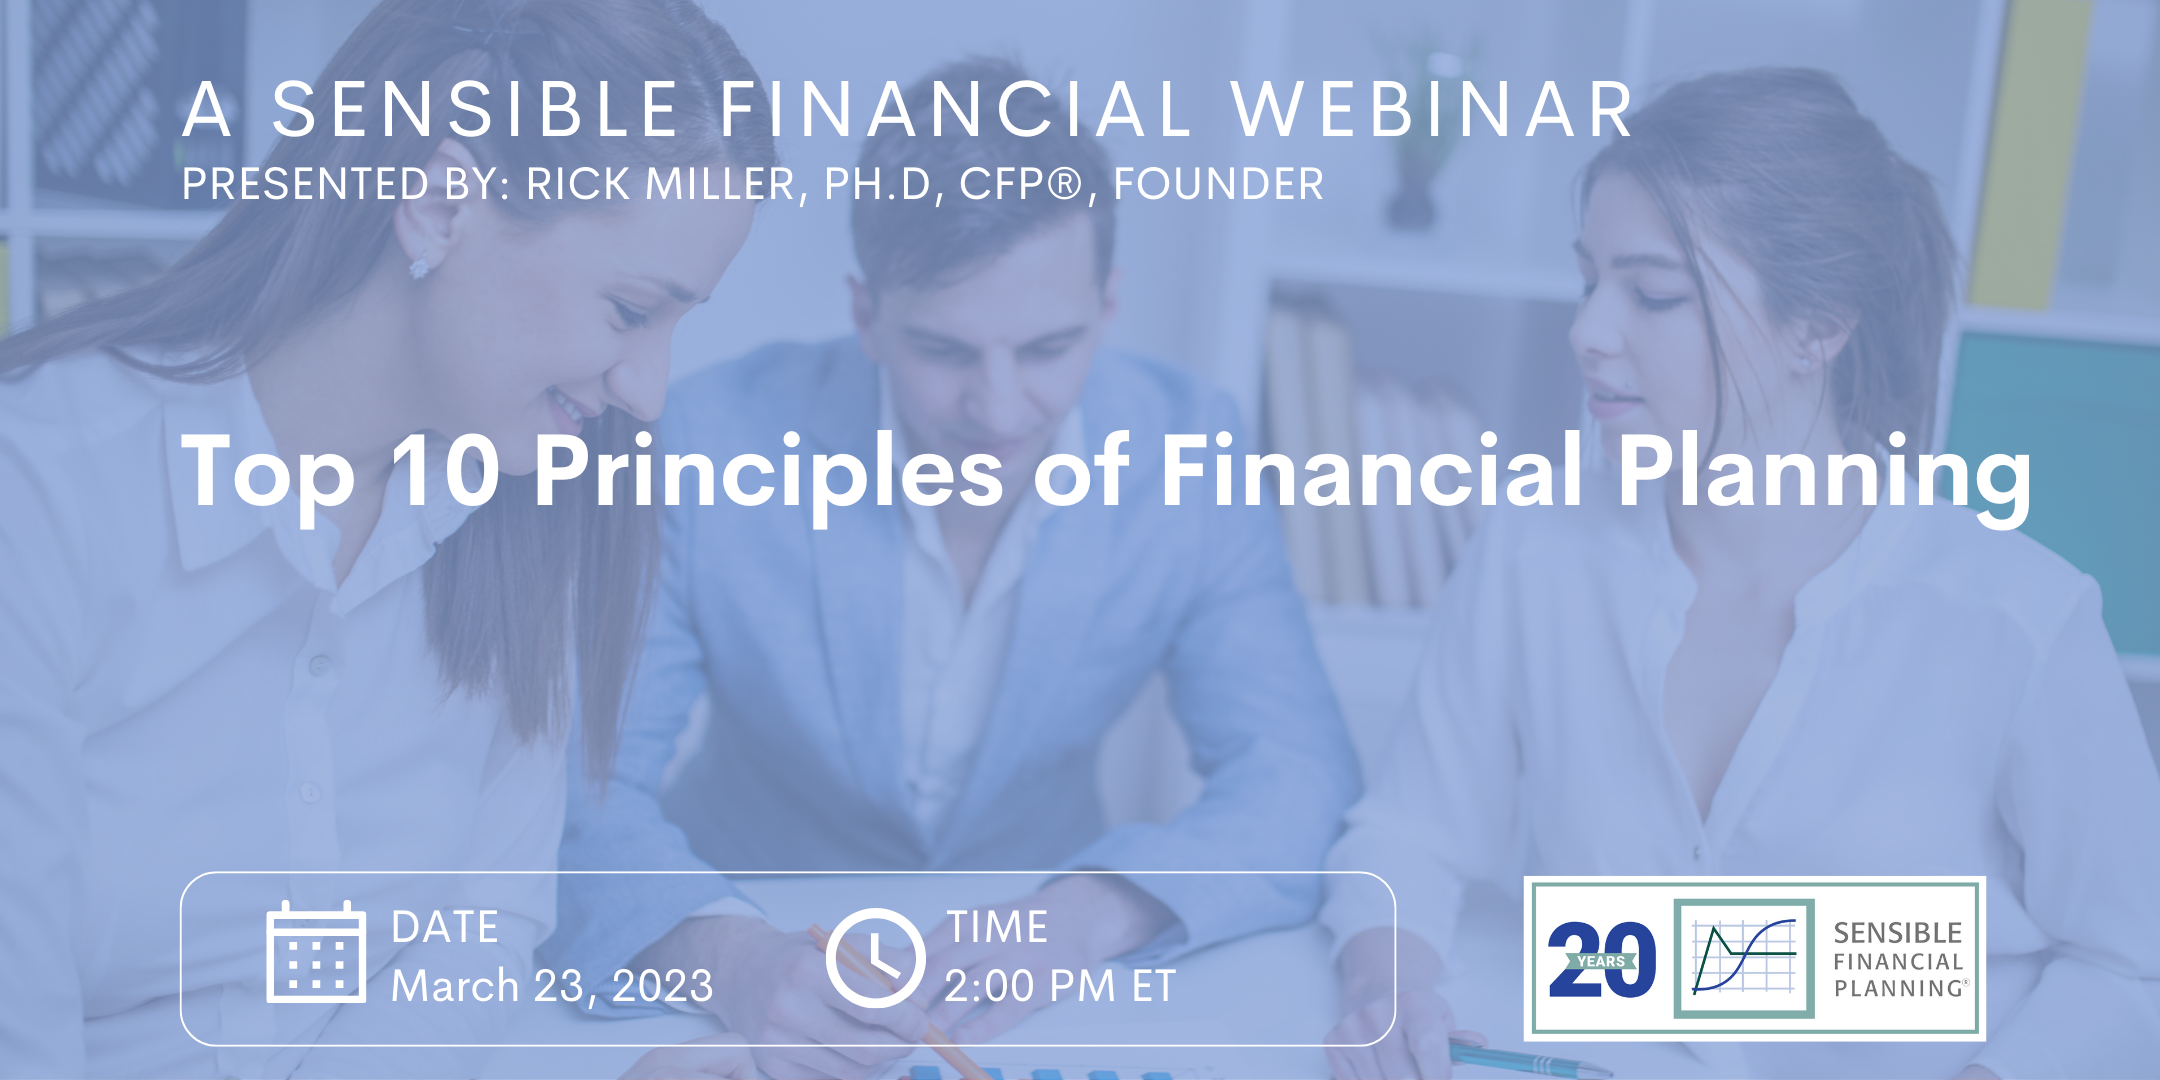 The banner shows the title, Top 10 Principles of Financial Planning.